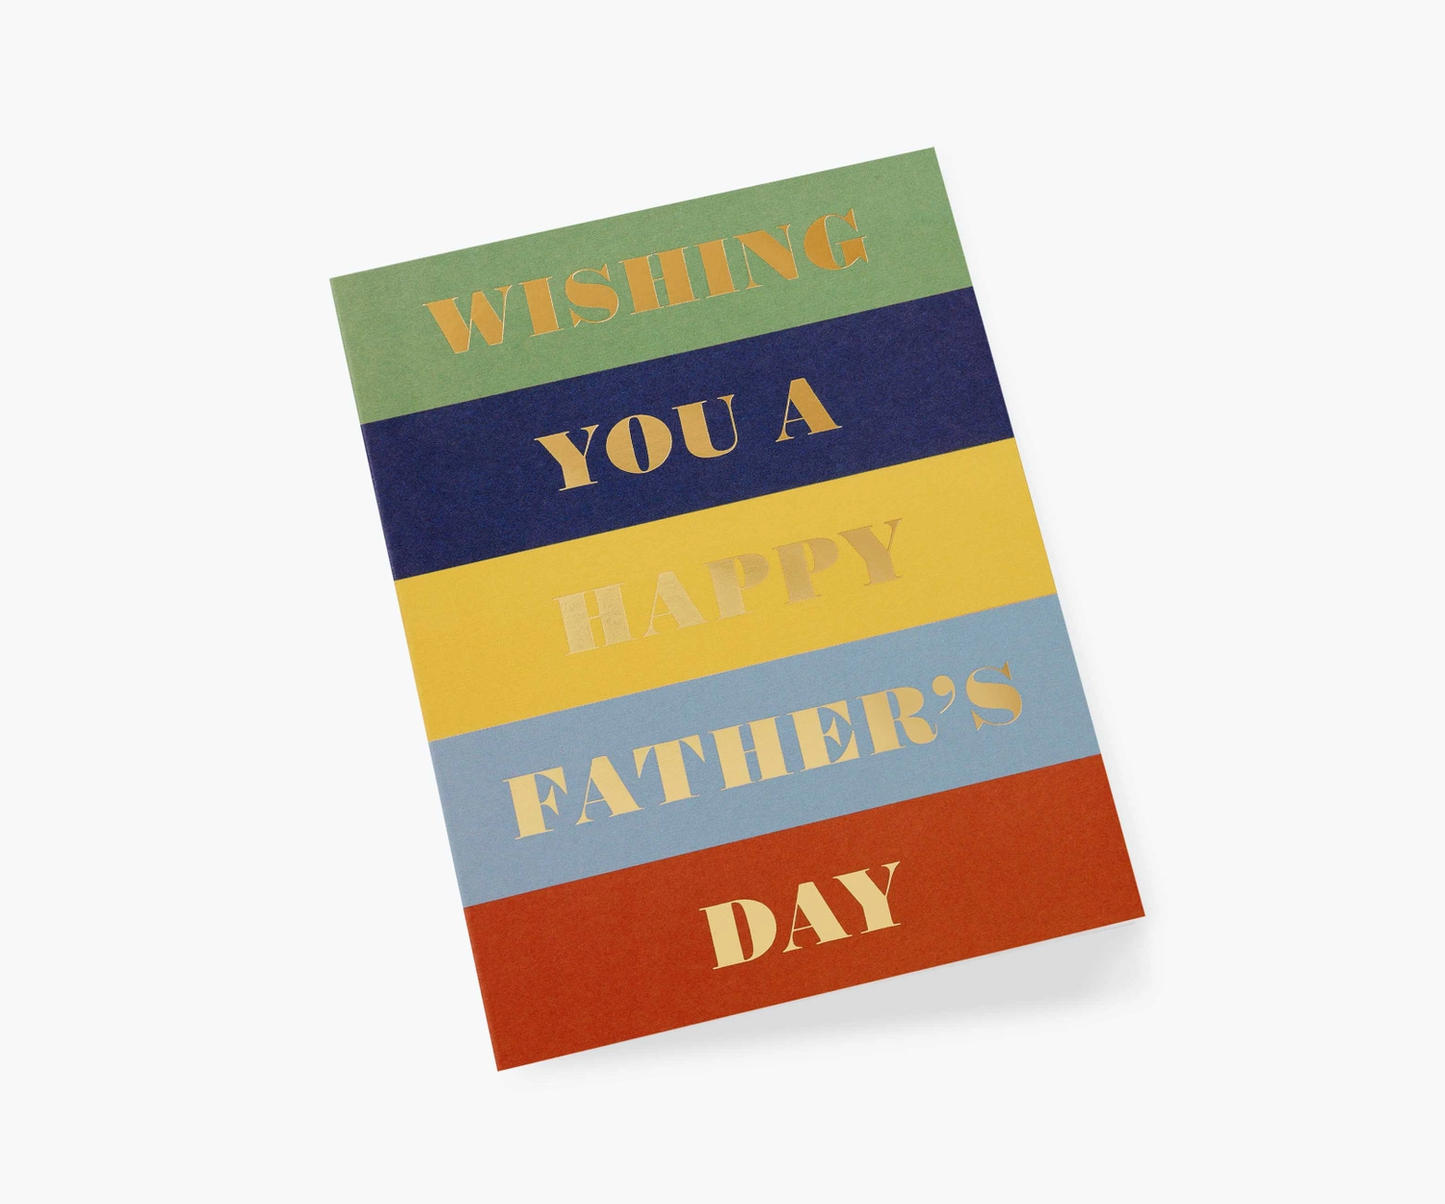 Rifle Paper Co. - Color Block Father's Day Greeting Card, Lee's Summit, MO, Bel Fiore Co. Flower Bar + Boutique